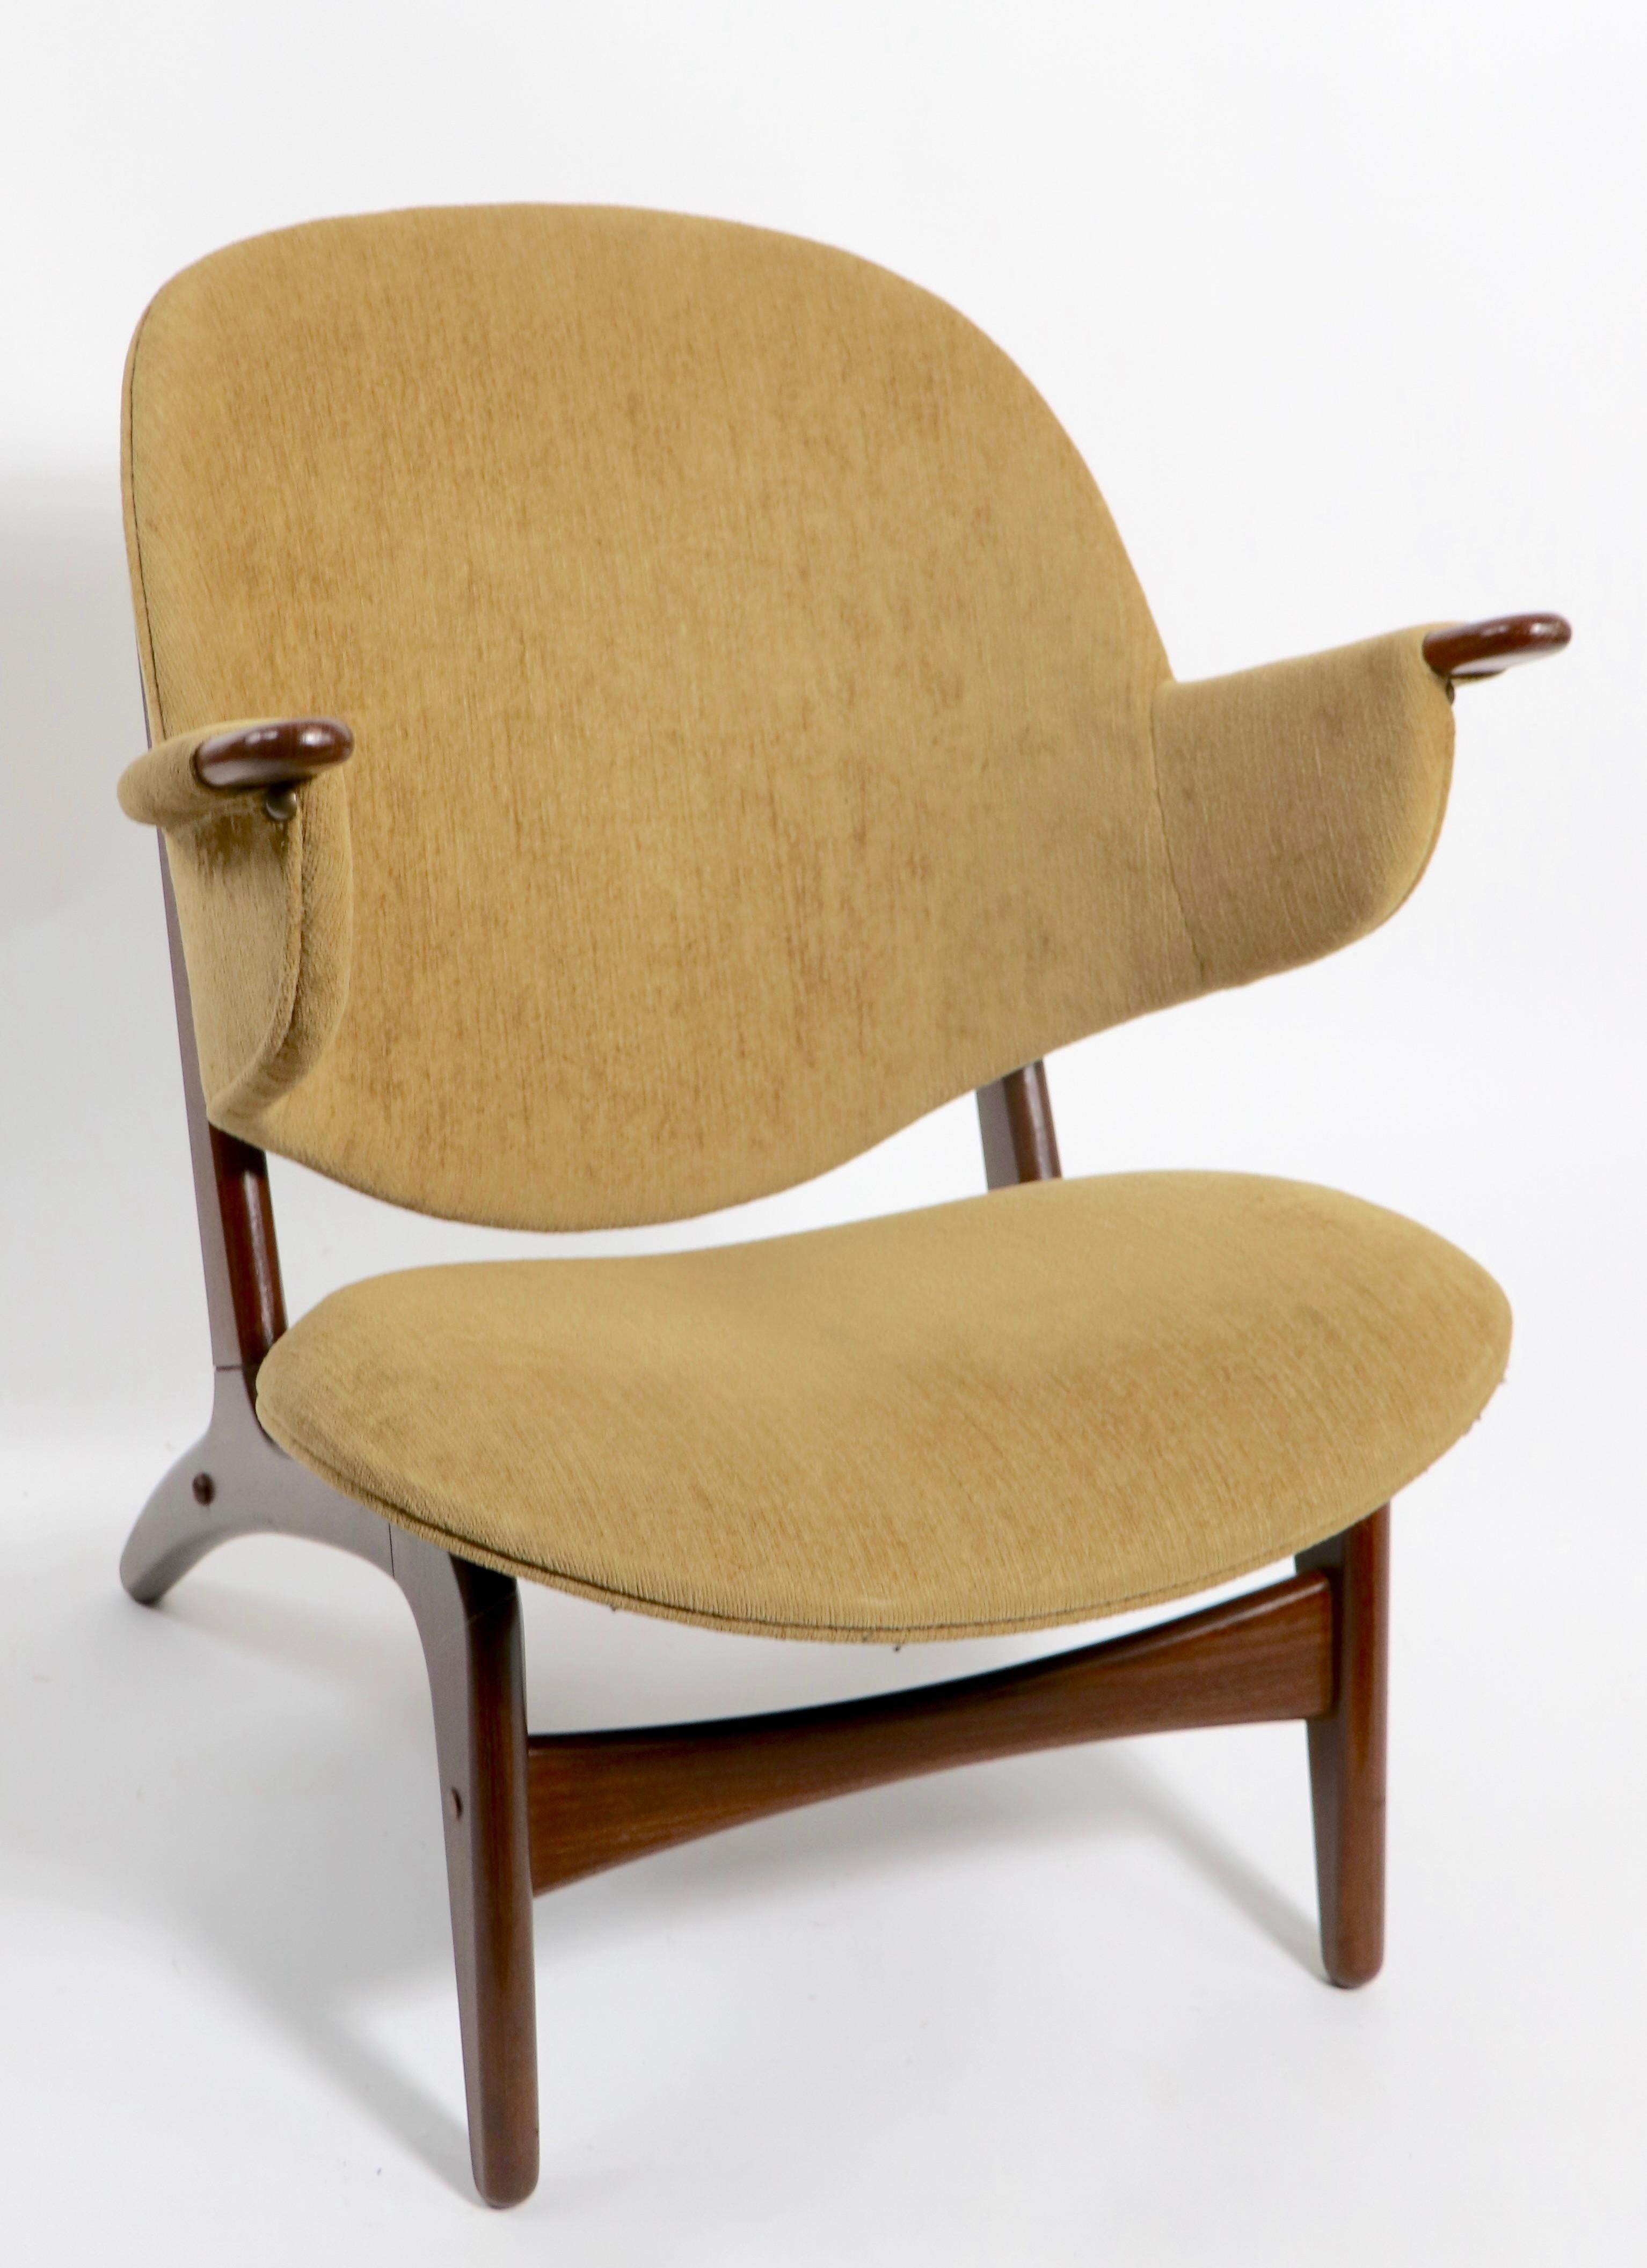 Chic architectural Danish modern paddle arm lounge chairs attributed to Poul Jessen. Both chairs have been newly restored, reupholstered and the wood frames have been refinished, one chair shows a professional repair to the leg joint ( see images ).